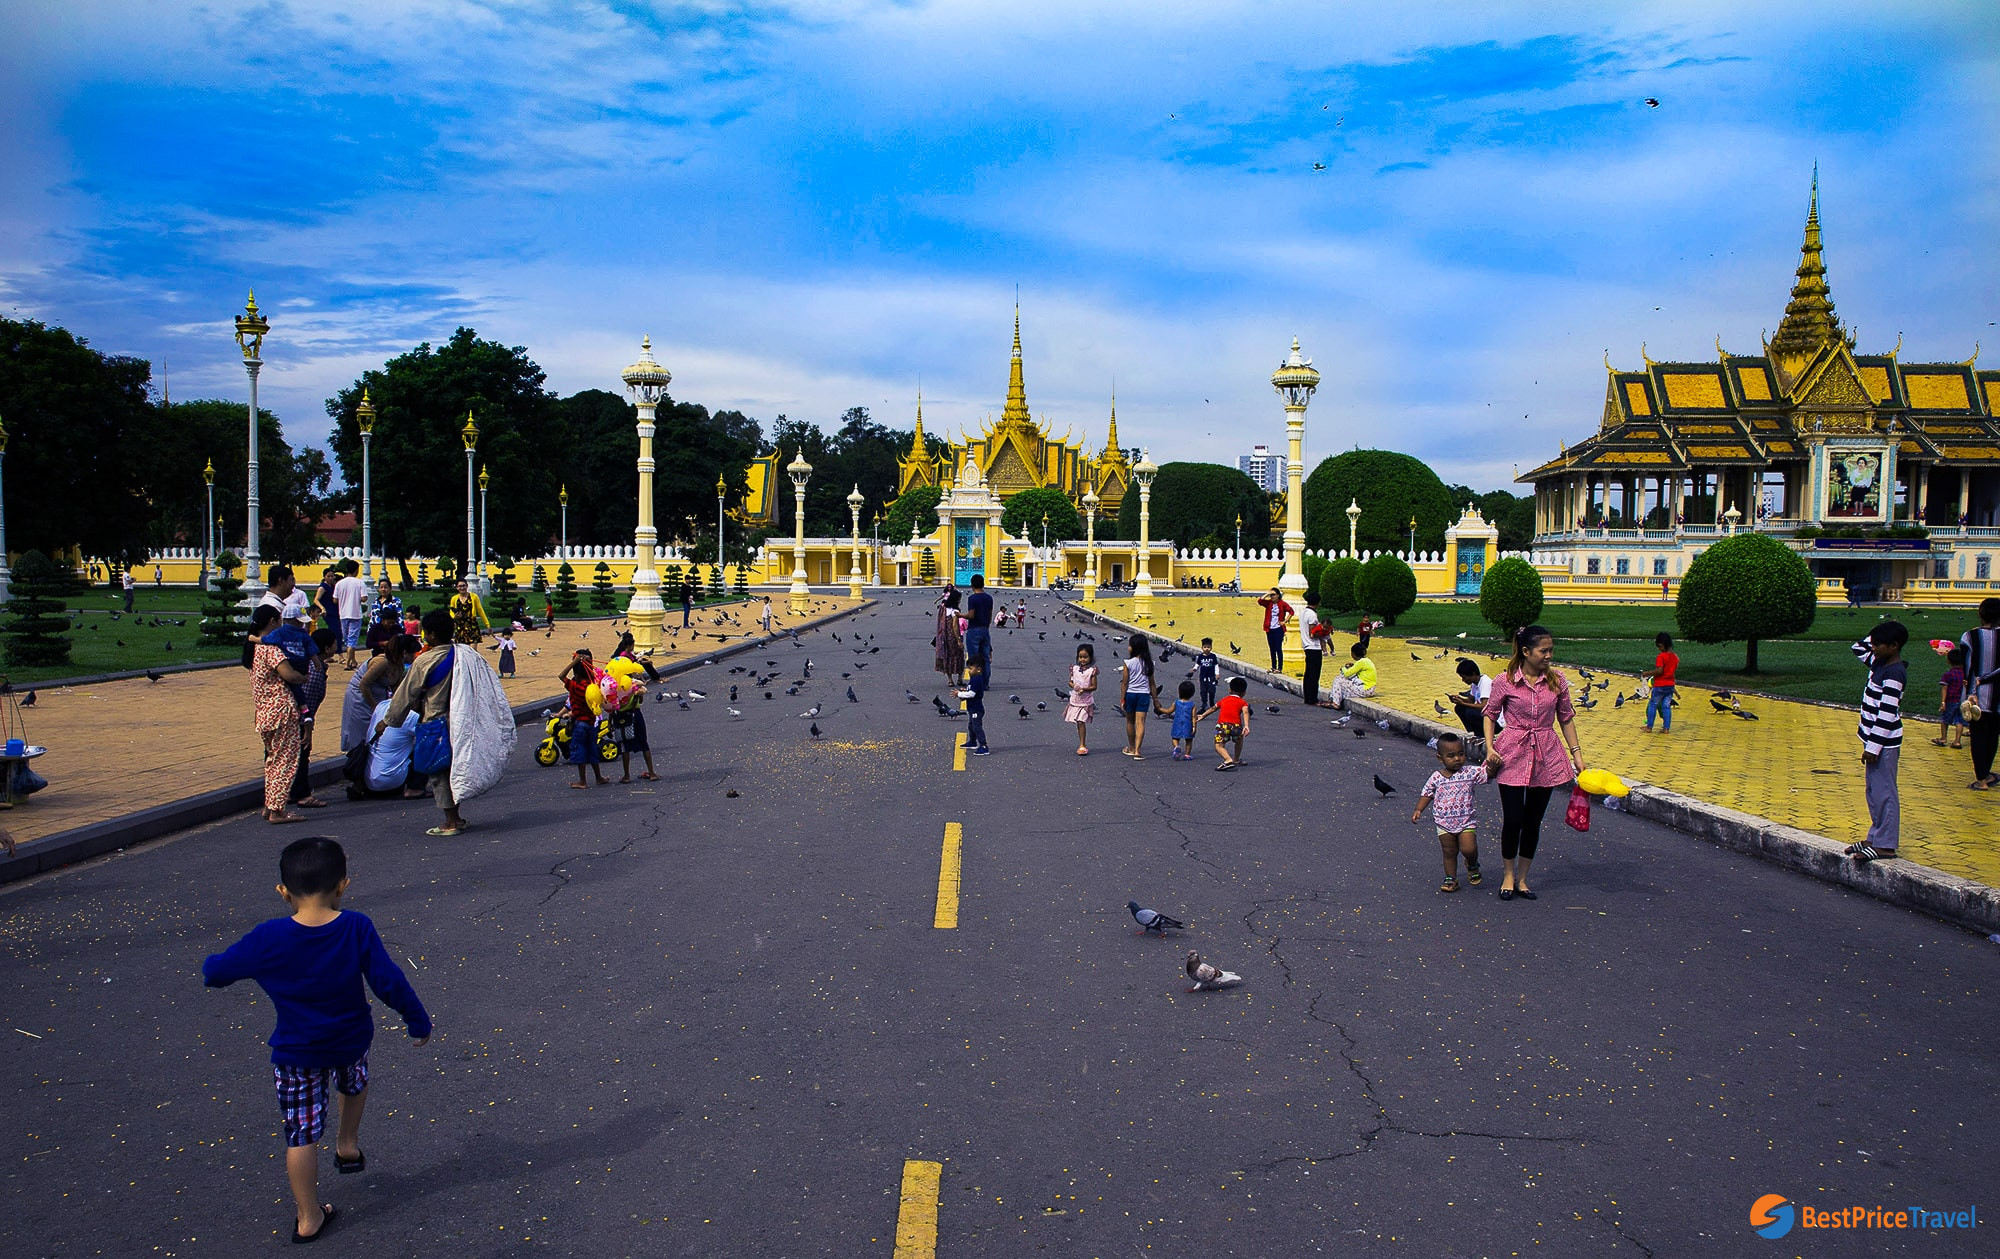 Square in front of Royal Palace